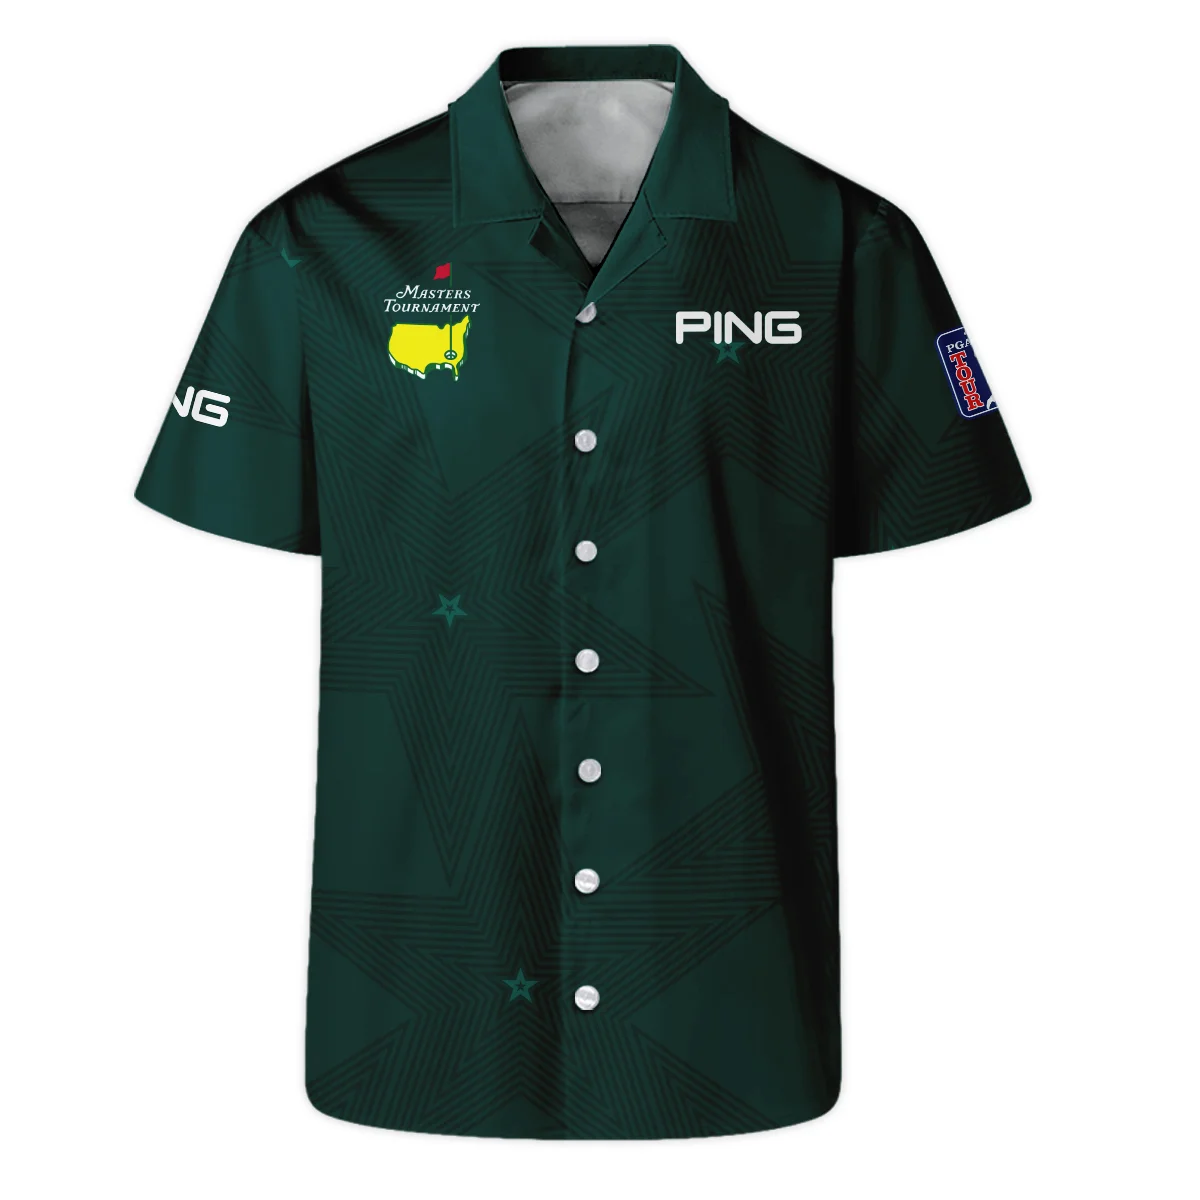 Dark Green Background Masters Tournament Ping Long Polo Shirt Style Classic Long Polo Shirt For Men